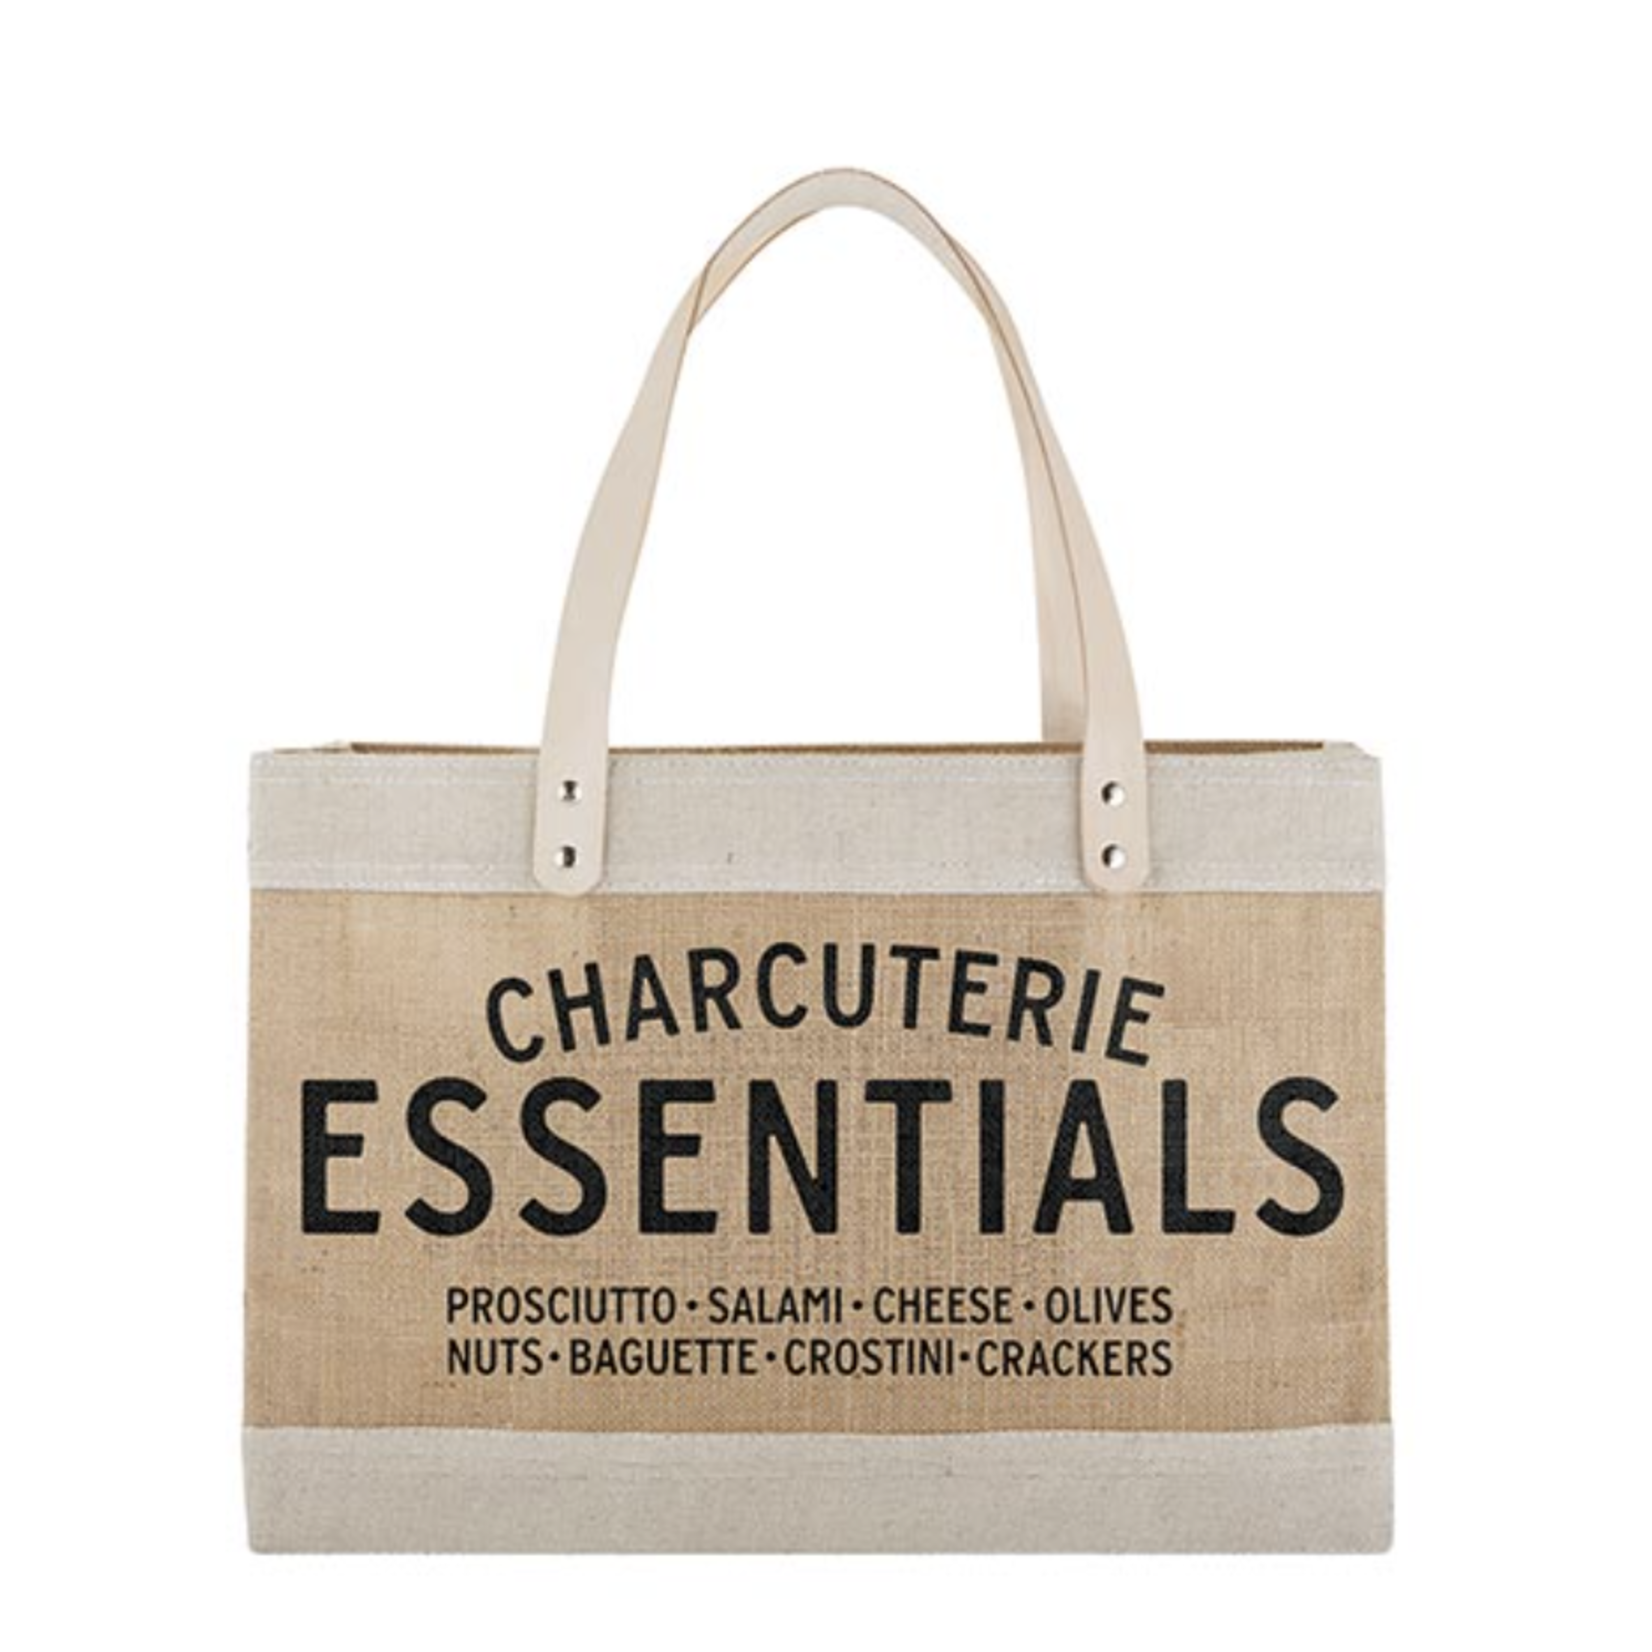 Outside The Box 17x8x12 "Charcuterie Essentials" Natural Jute & Leather Market Tote